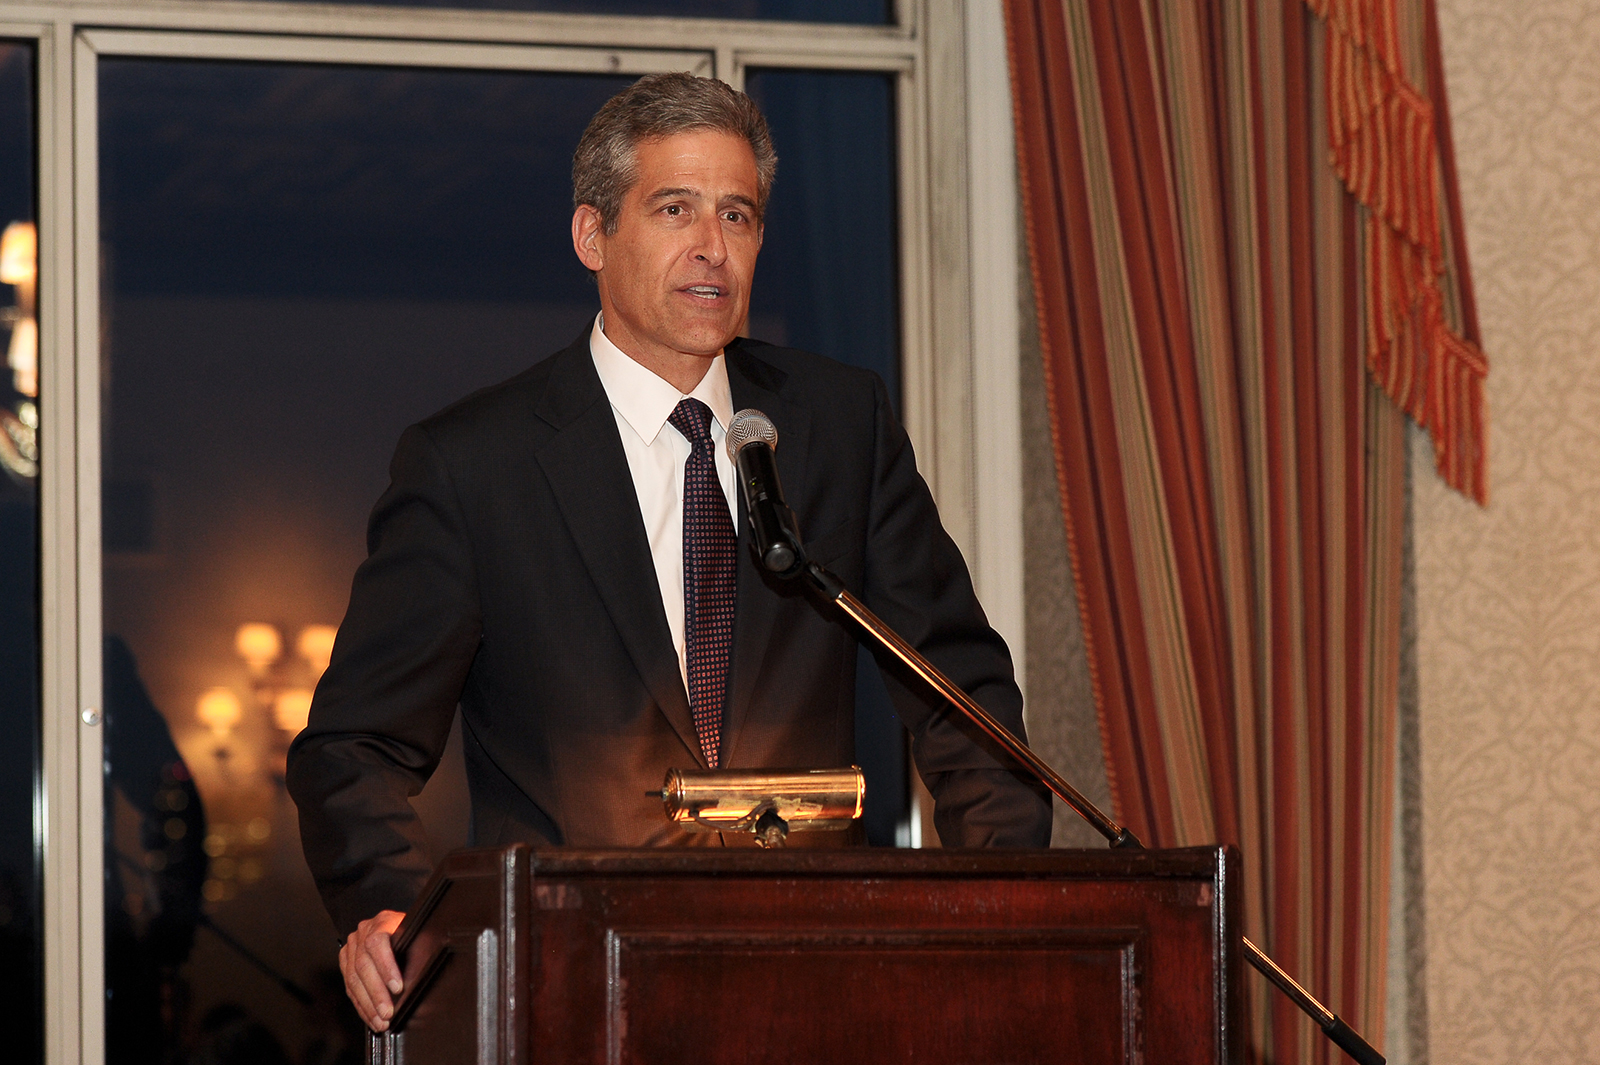 Dr. Richard Besser attends a gala at the New York Athletic Club on April 28, 2014 in New York City.